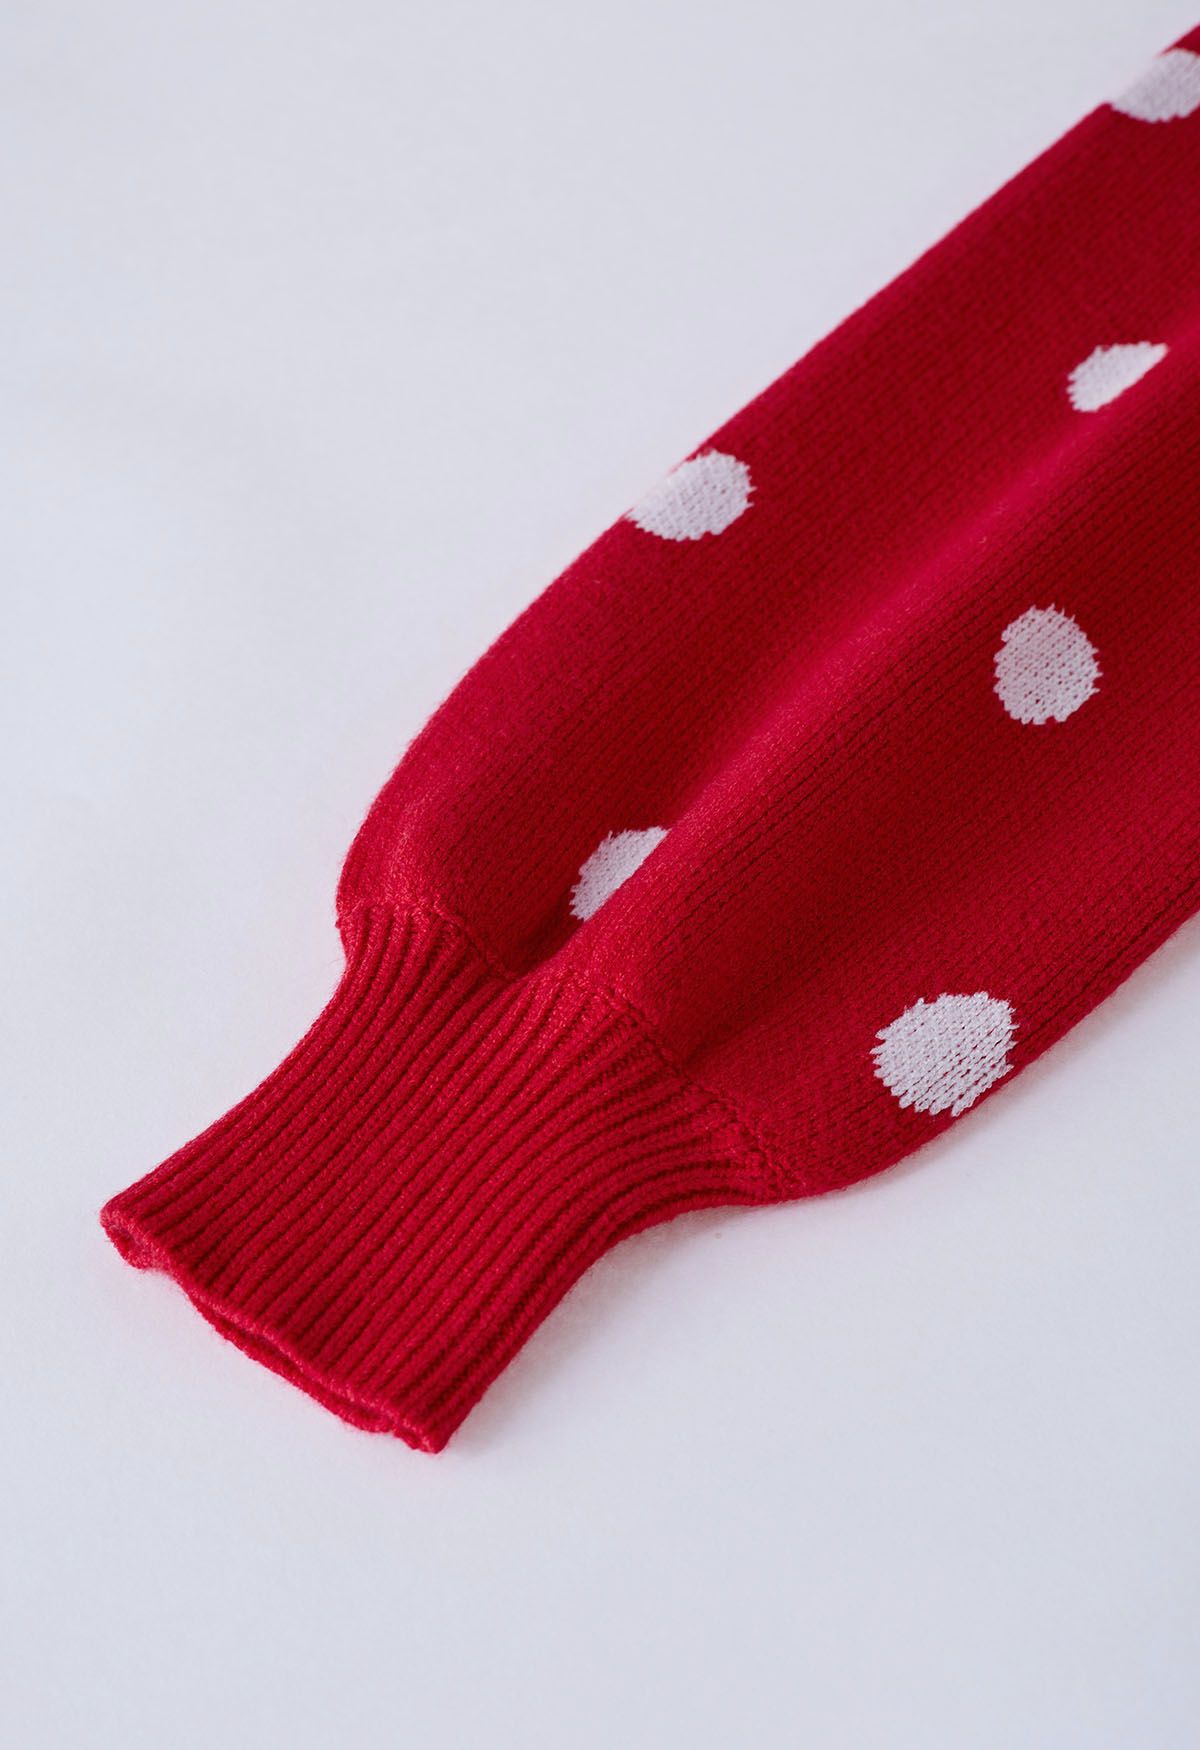 Adorable Polka Dot Mock Neck Knit Sweater in Red